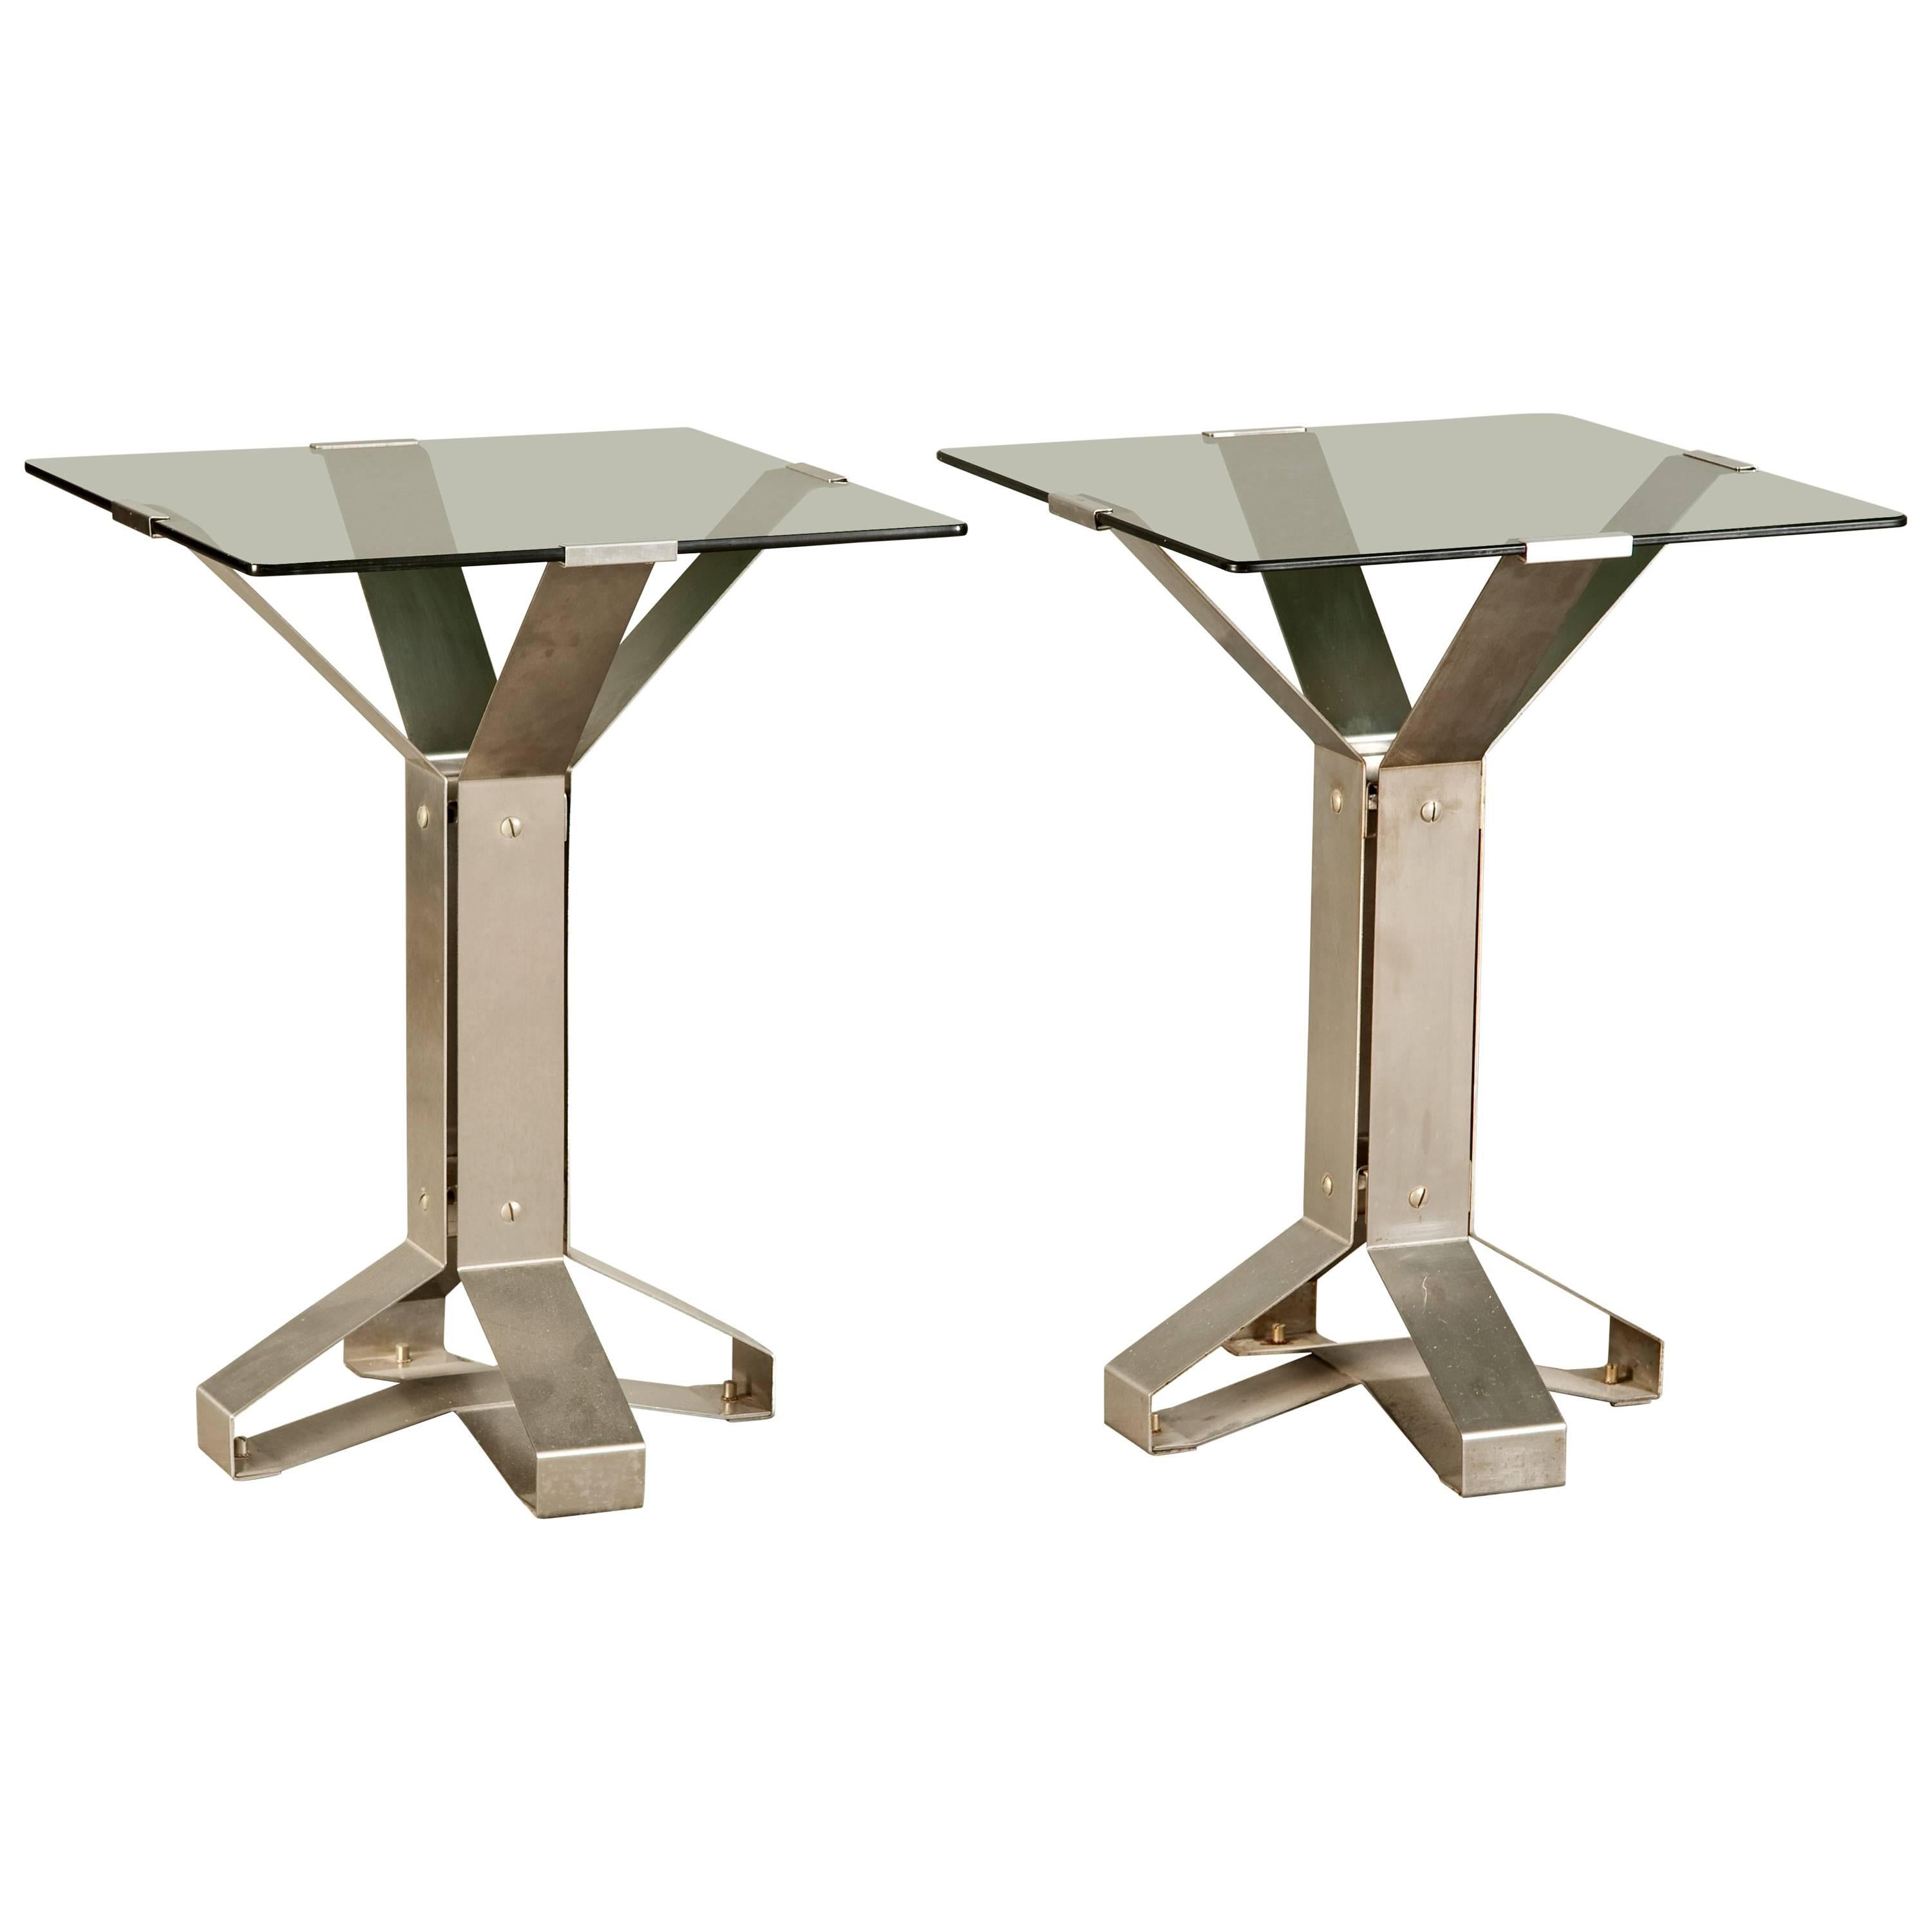 Pair of Chrome and Glass Coffee Tables